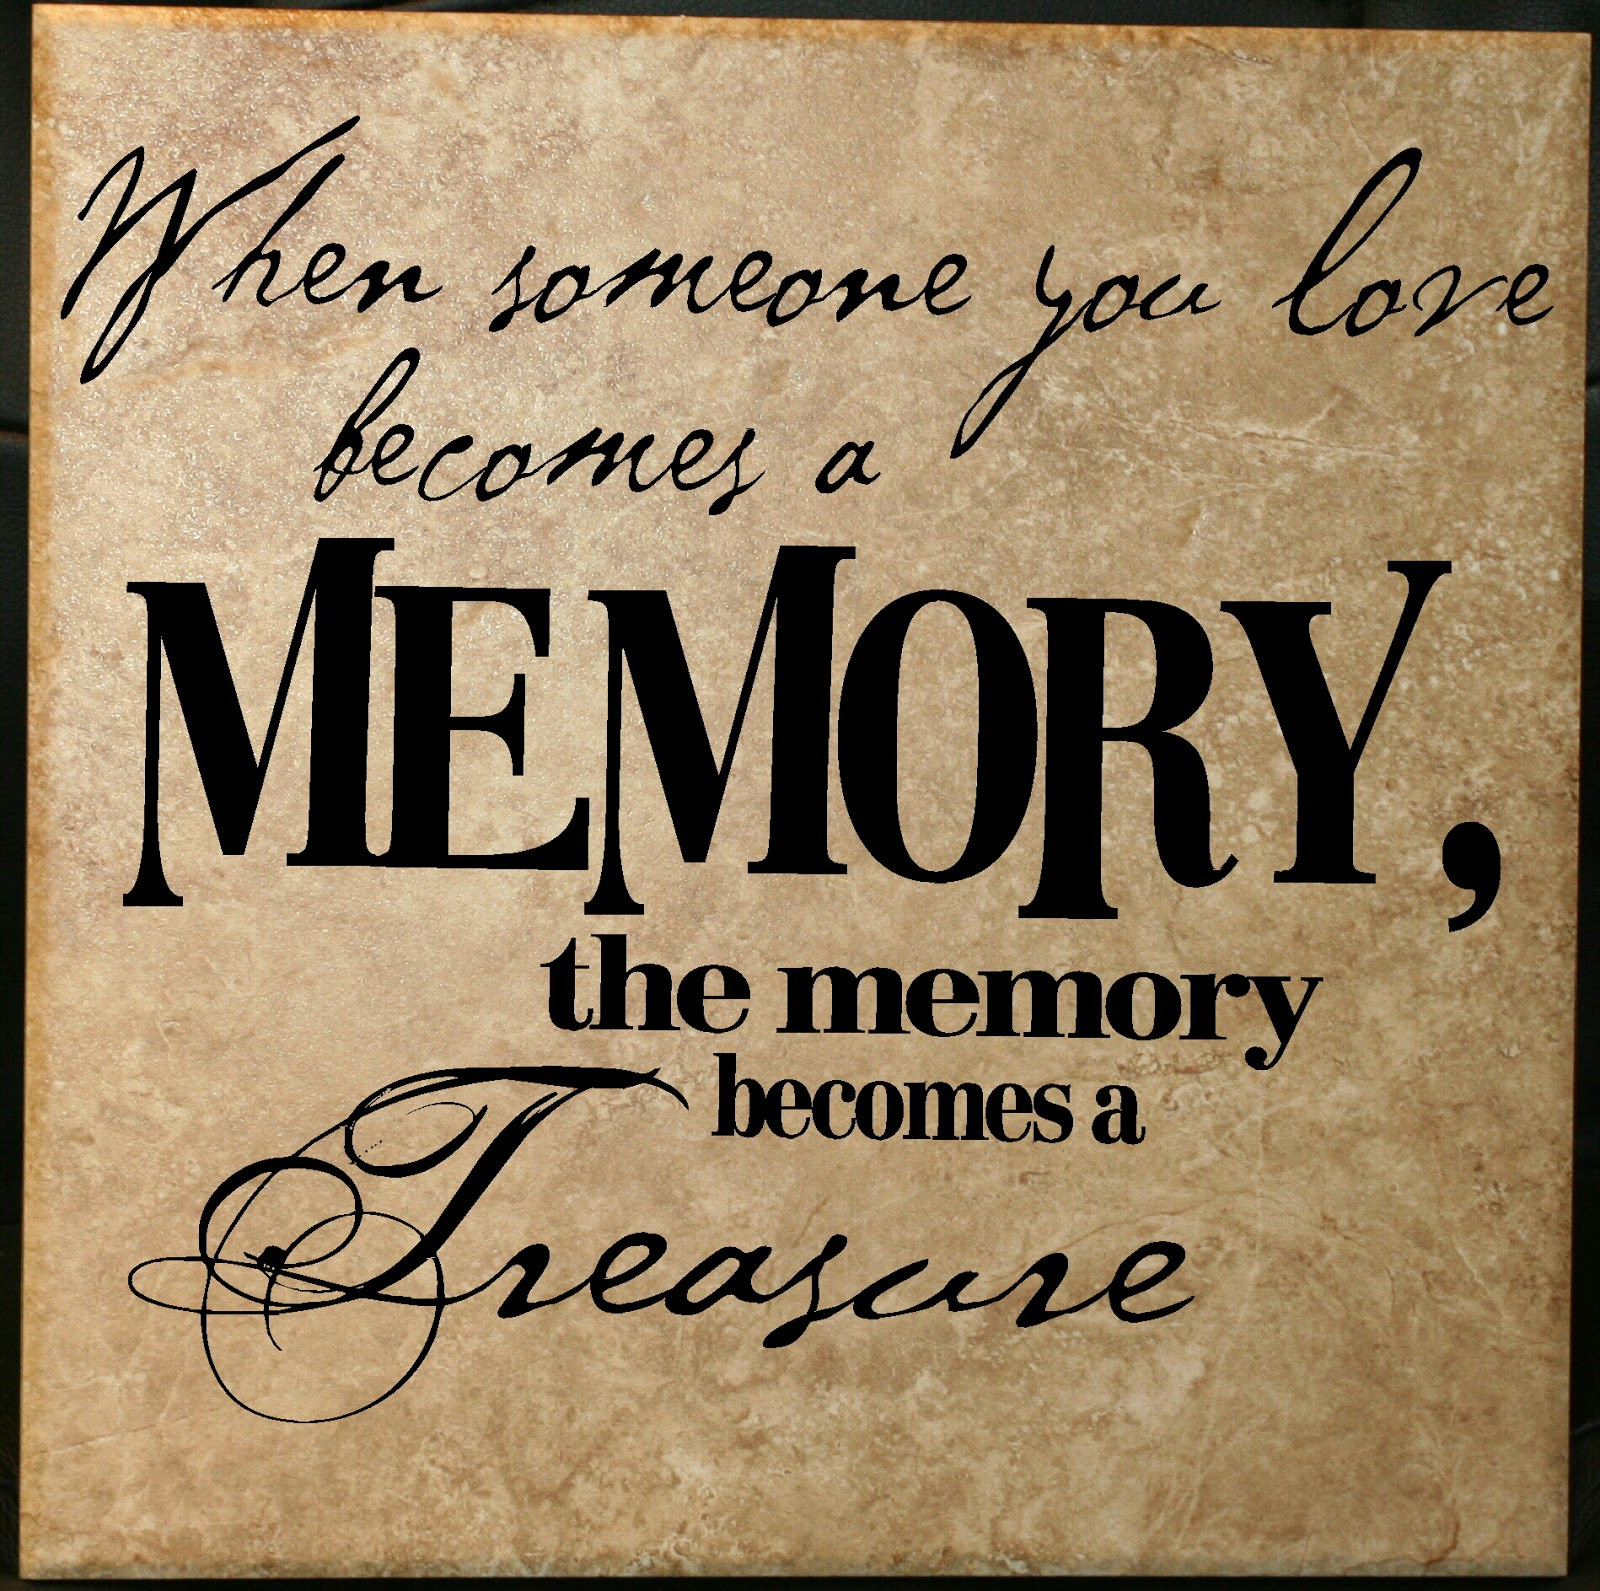 Death Of A Loved One Quote
 Decorating with Wall Vinyl In Memory and Sympathy Quote